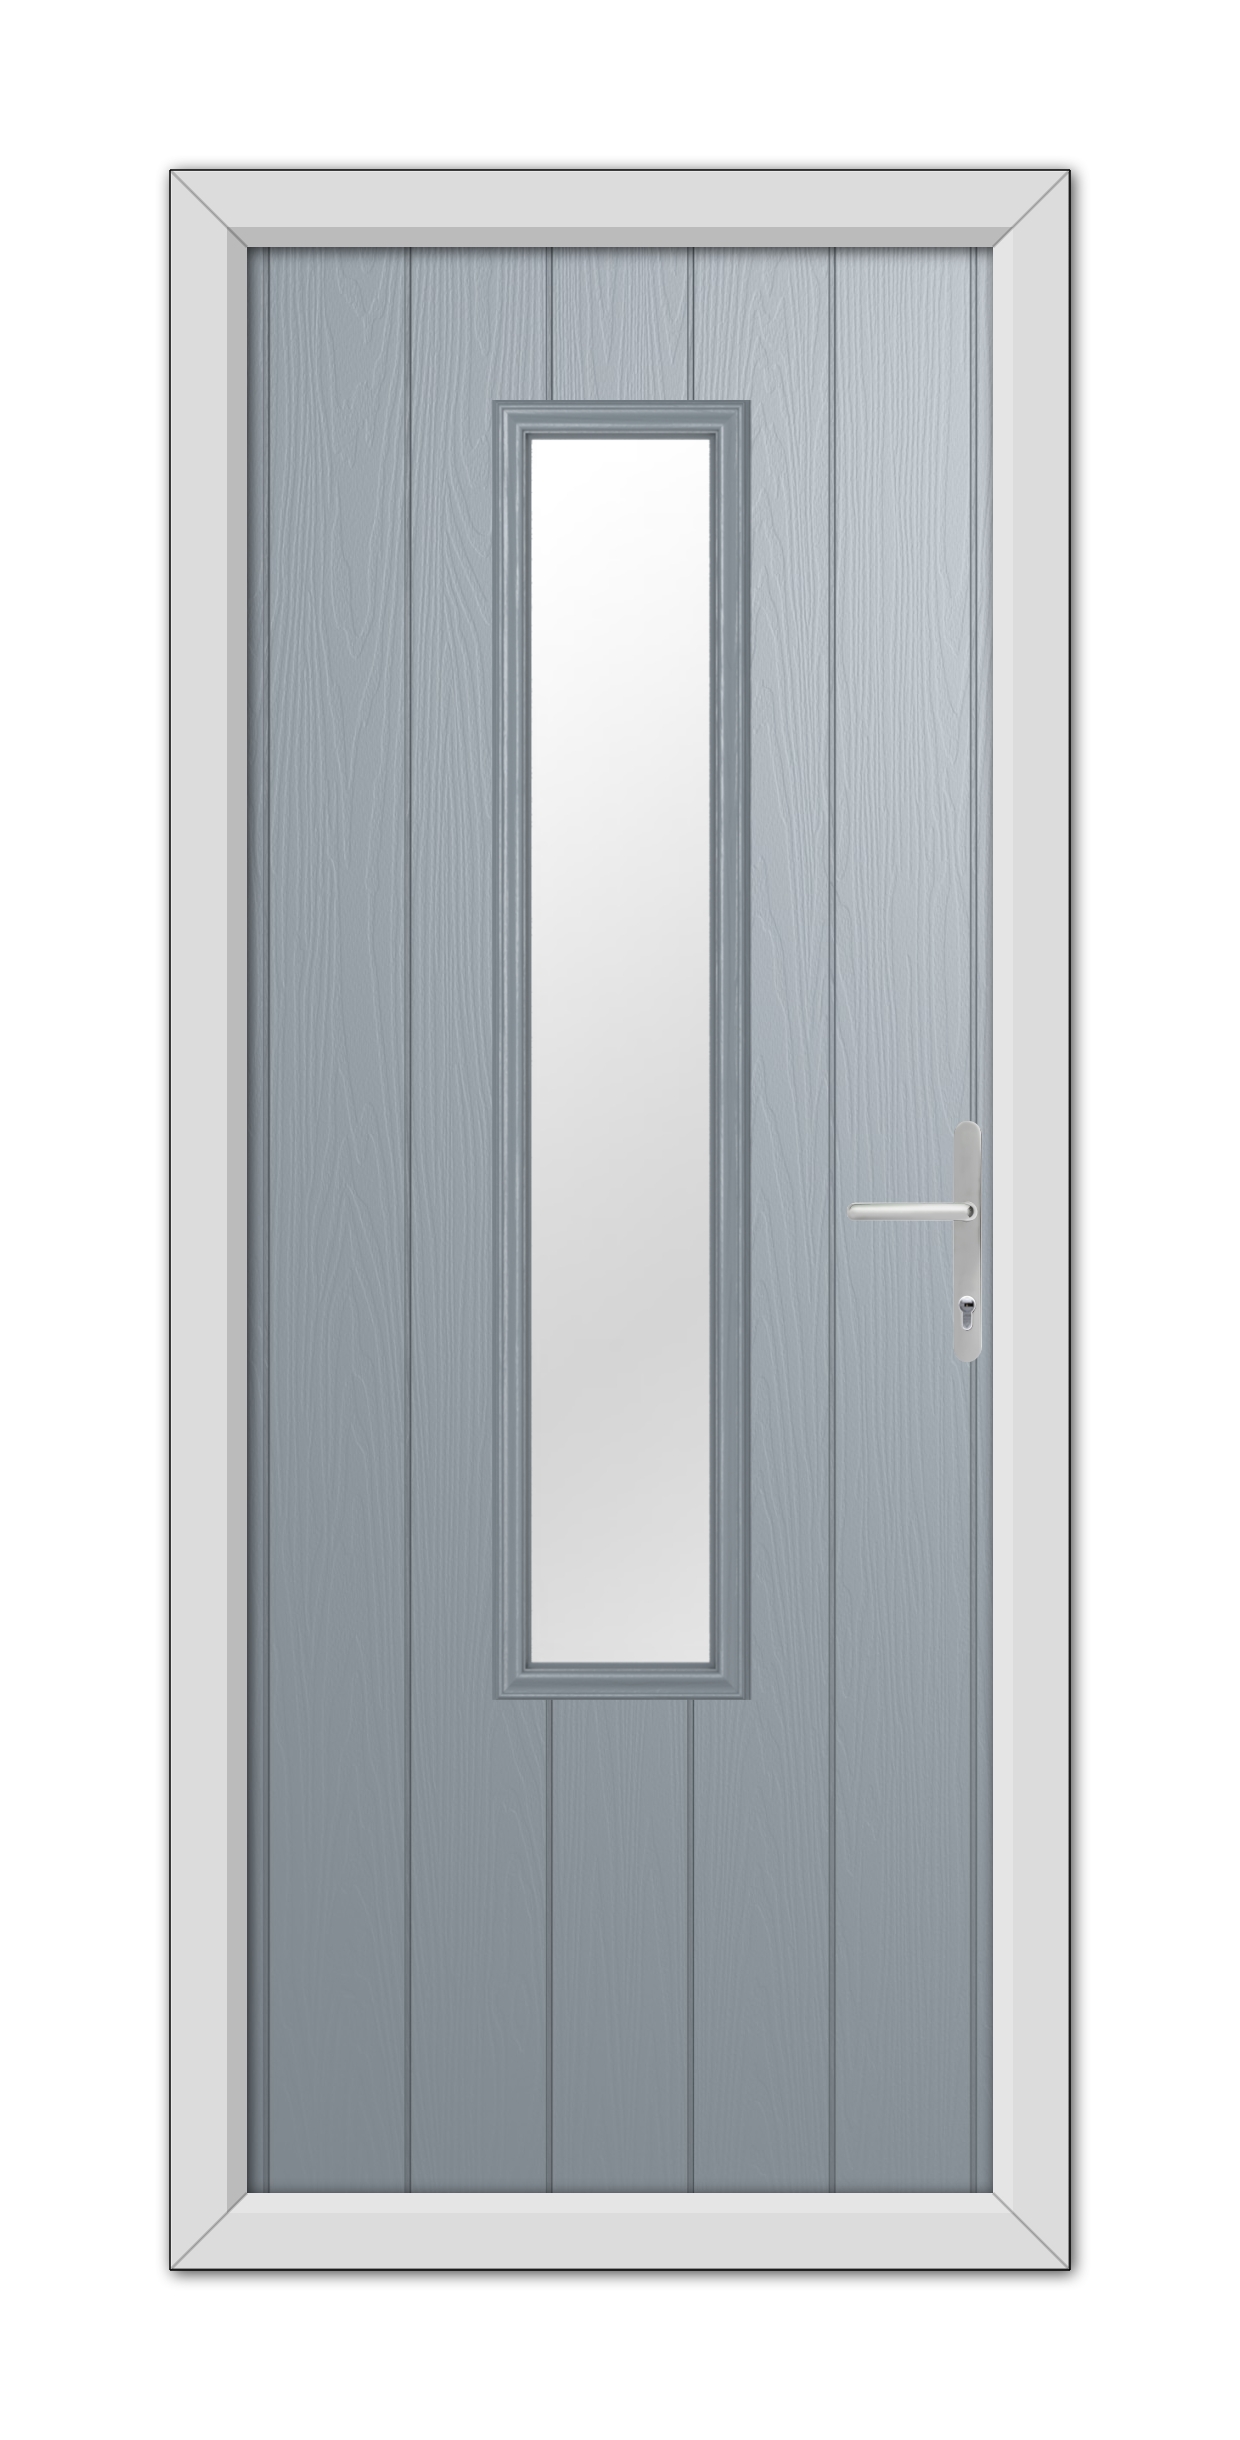 A modern French Grey Abercorn Composite Door with a vertical rectangular window and white frame, featuring a sleek silver handle on the right side.